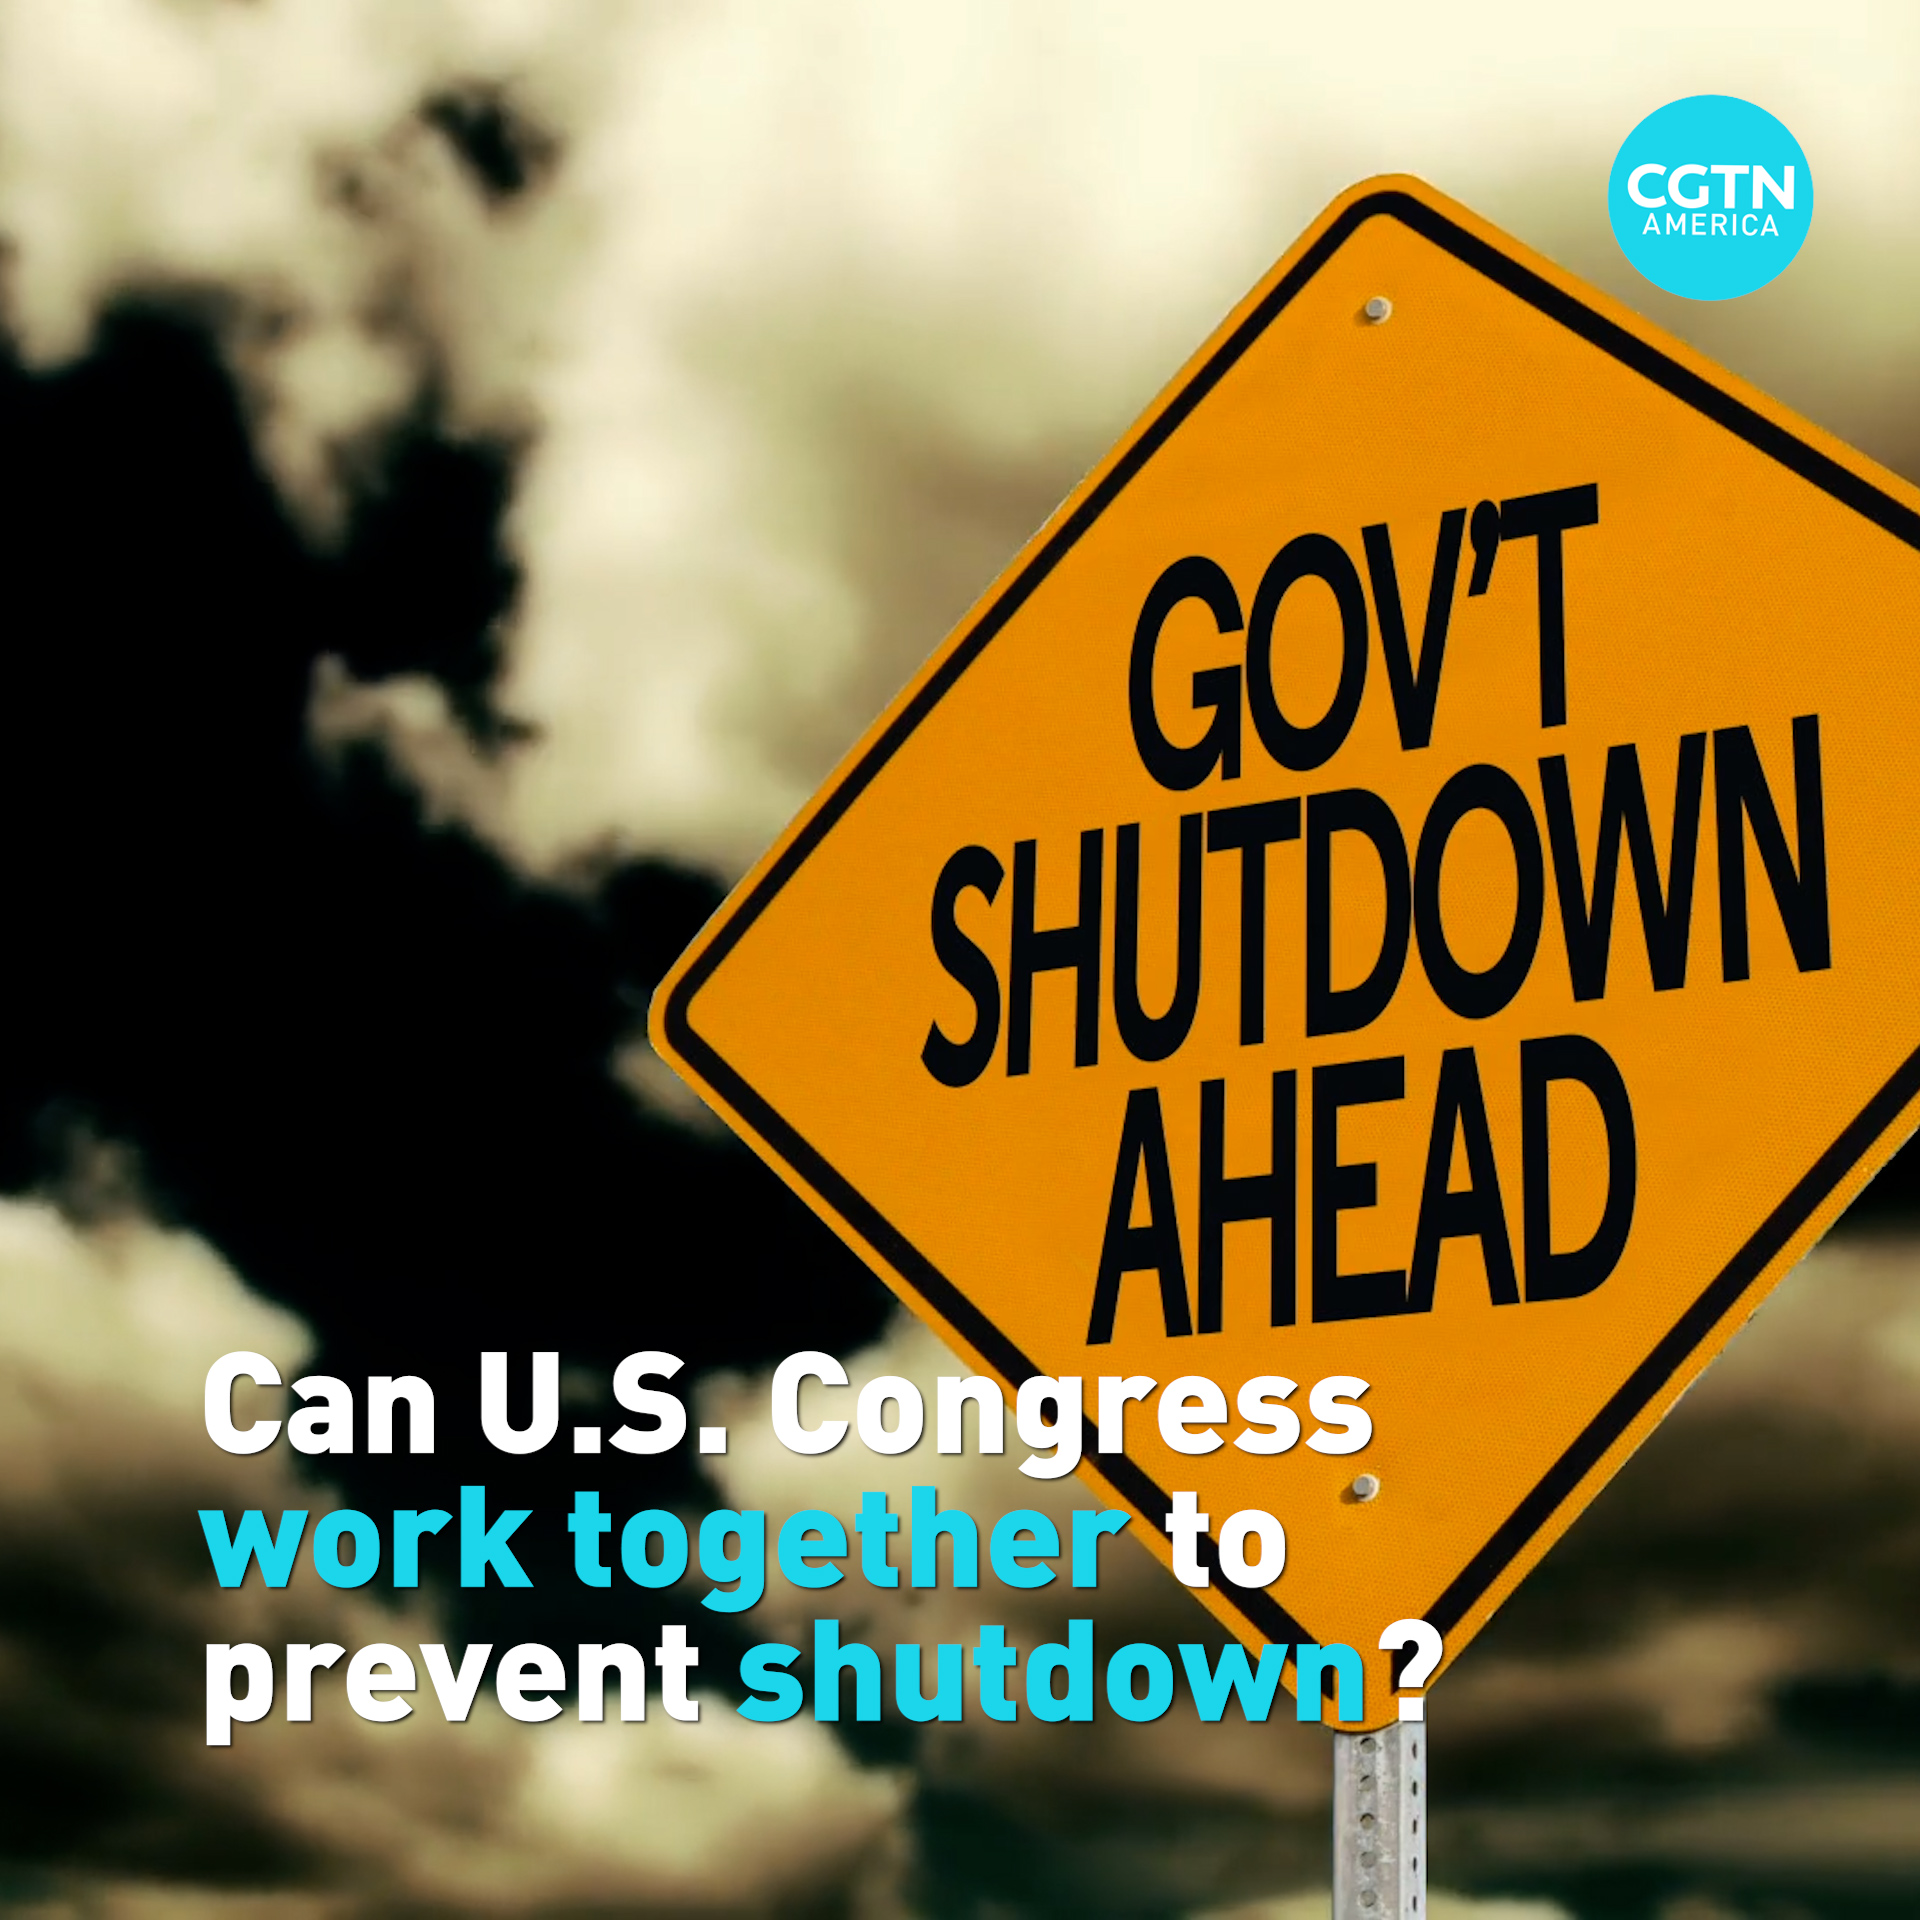 Can U.S. Congress work together to prevent shutdown?